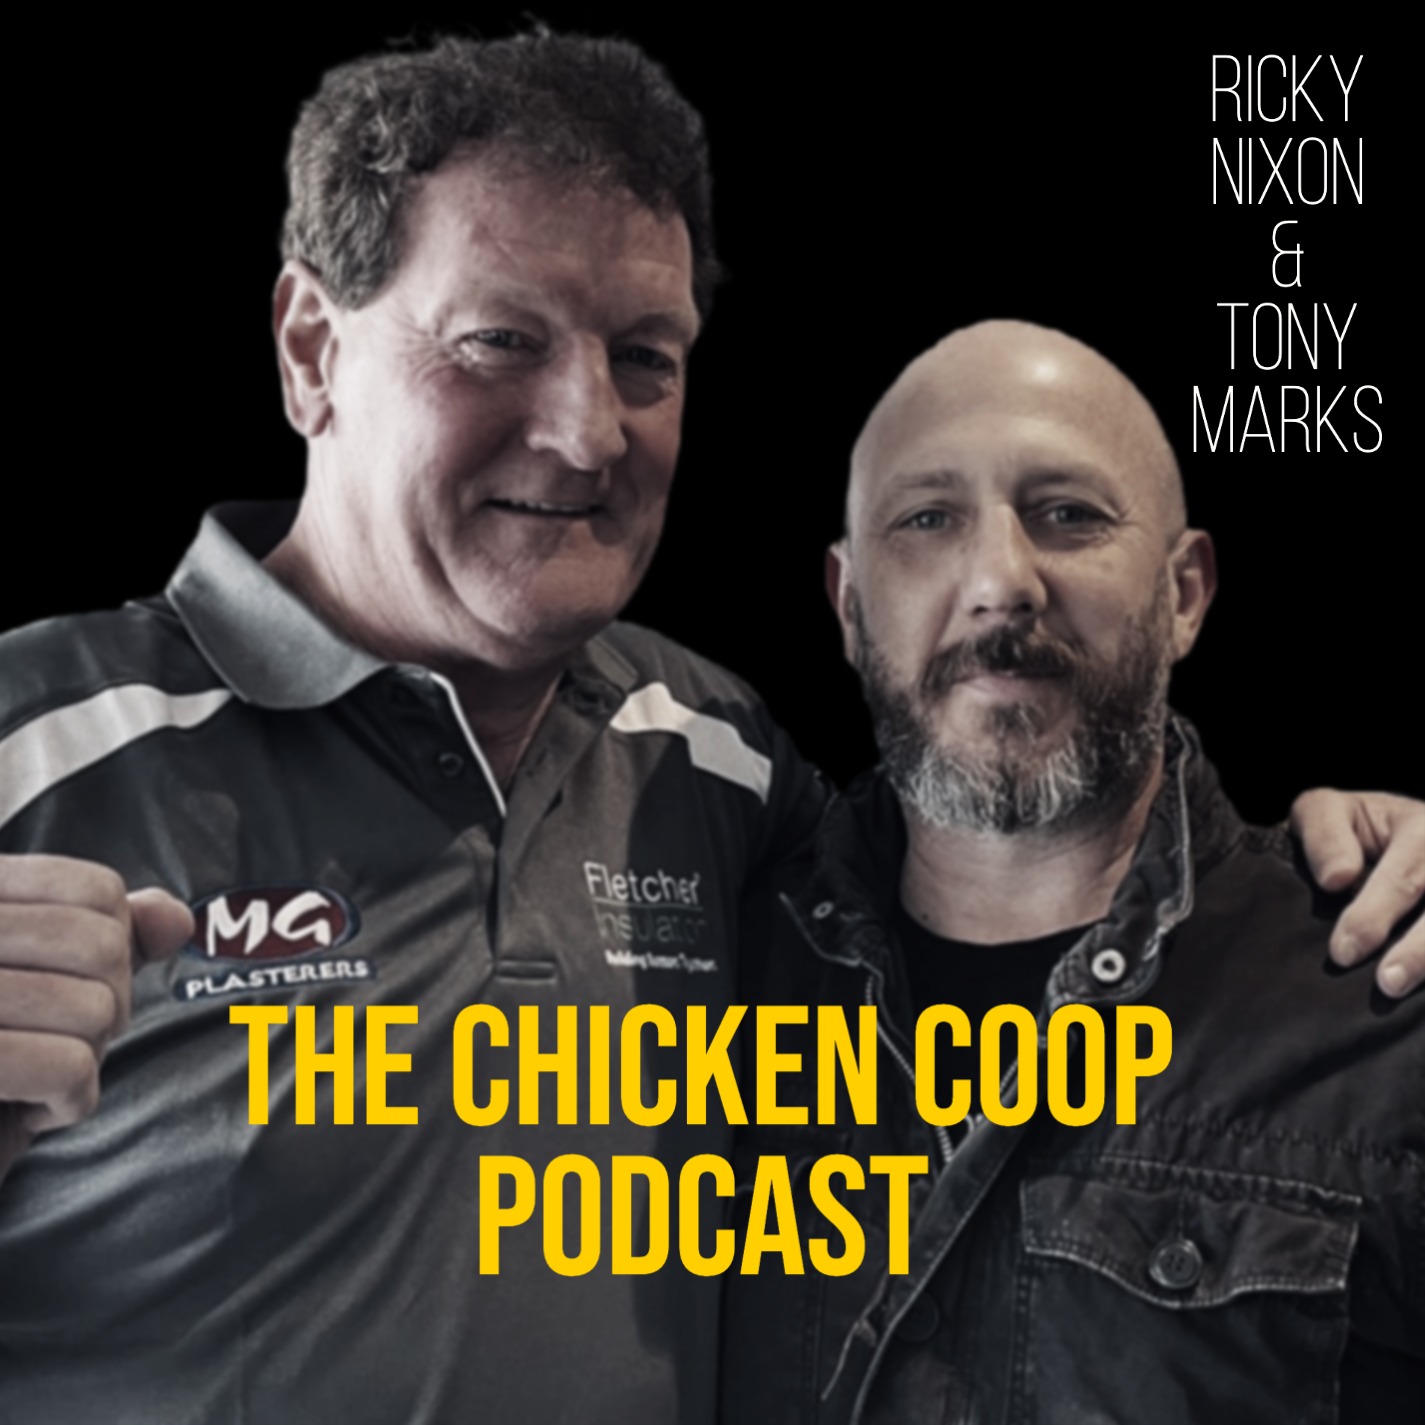 The Chicken Coop with Ricky Nixon & Tony Marks - Episode 1